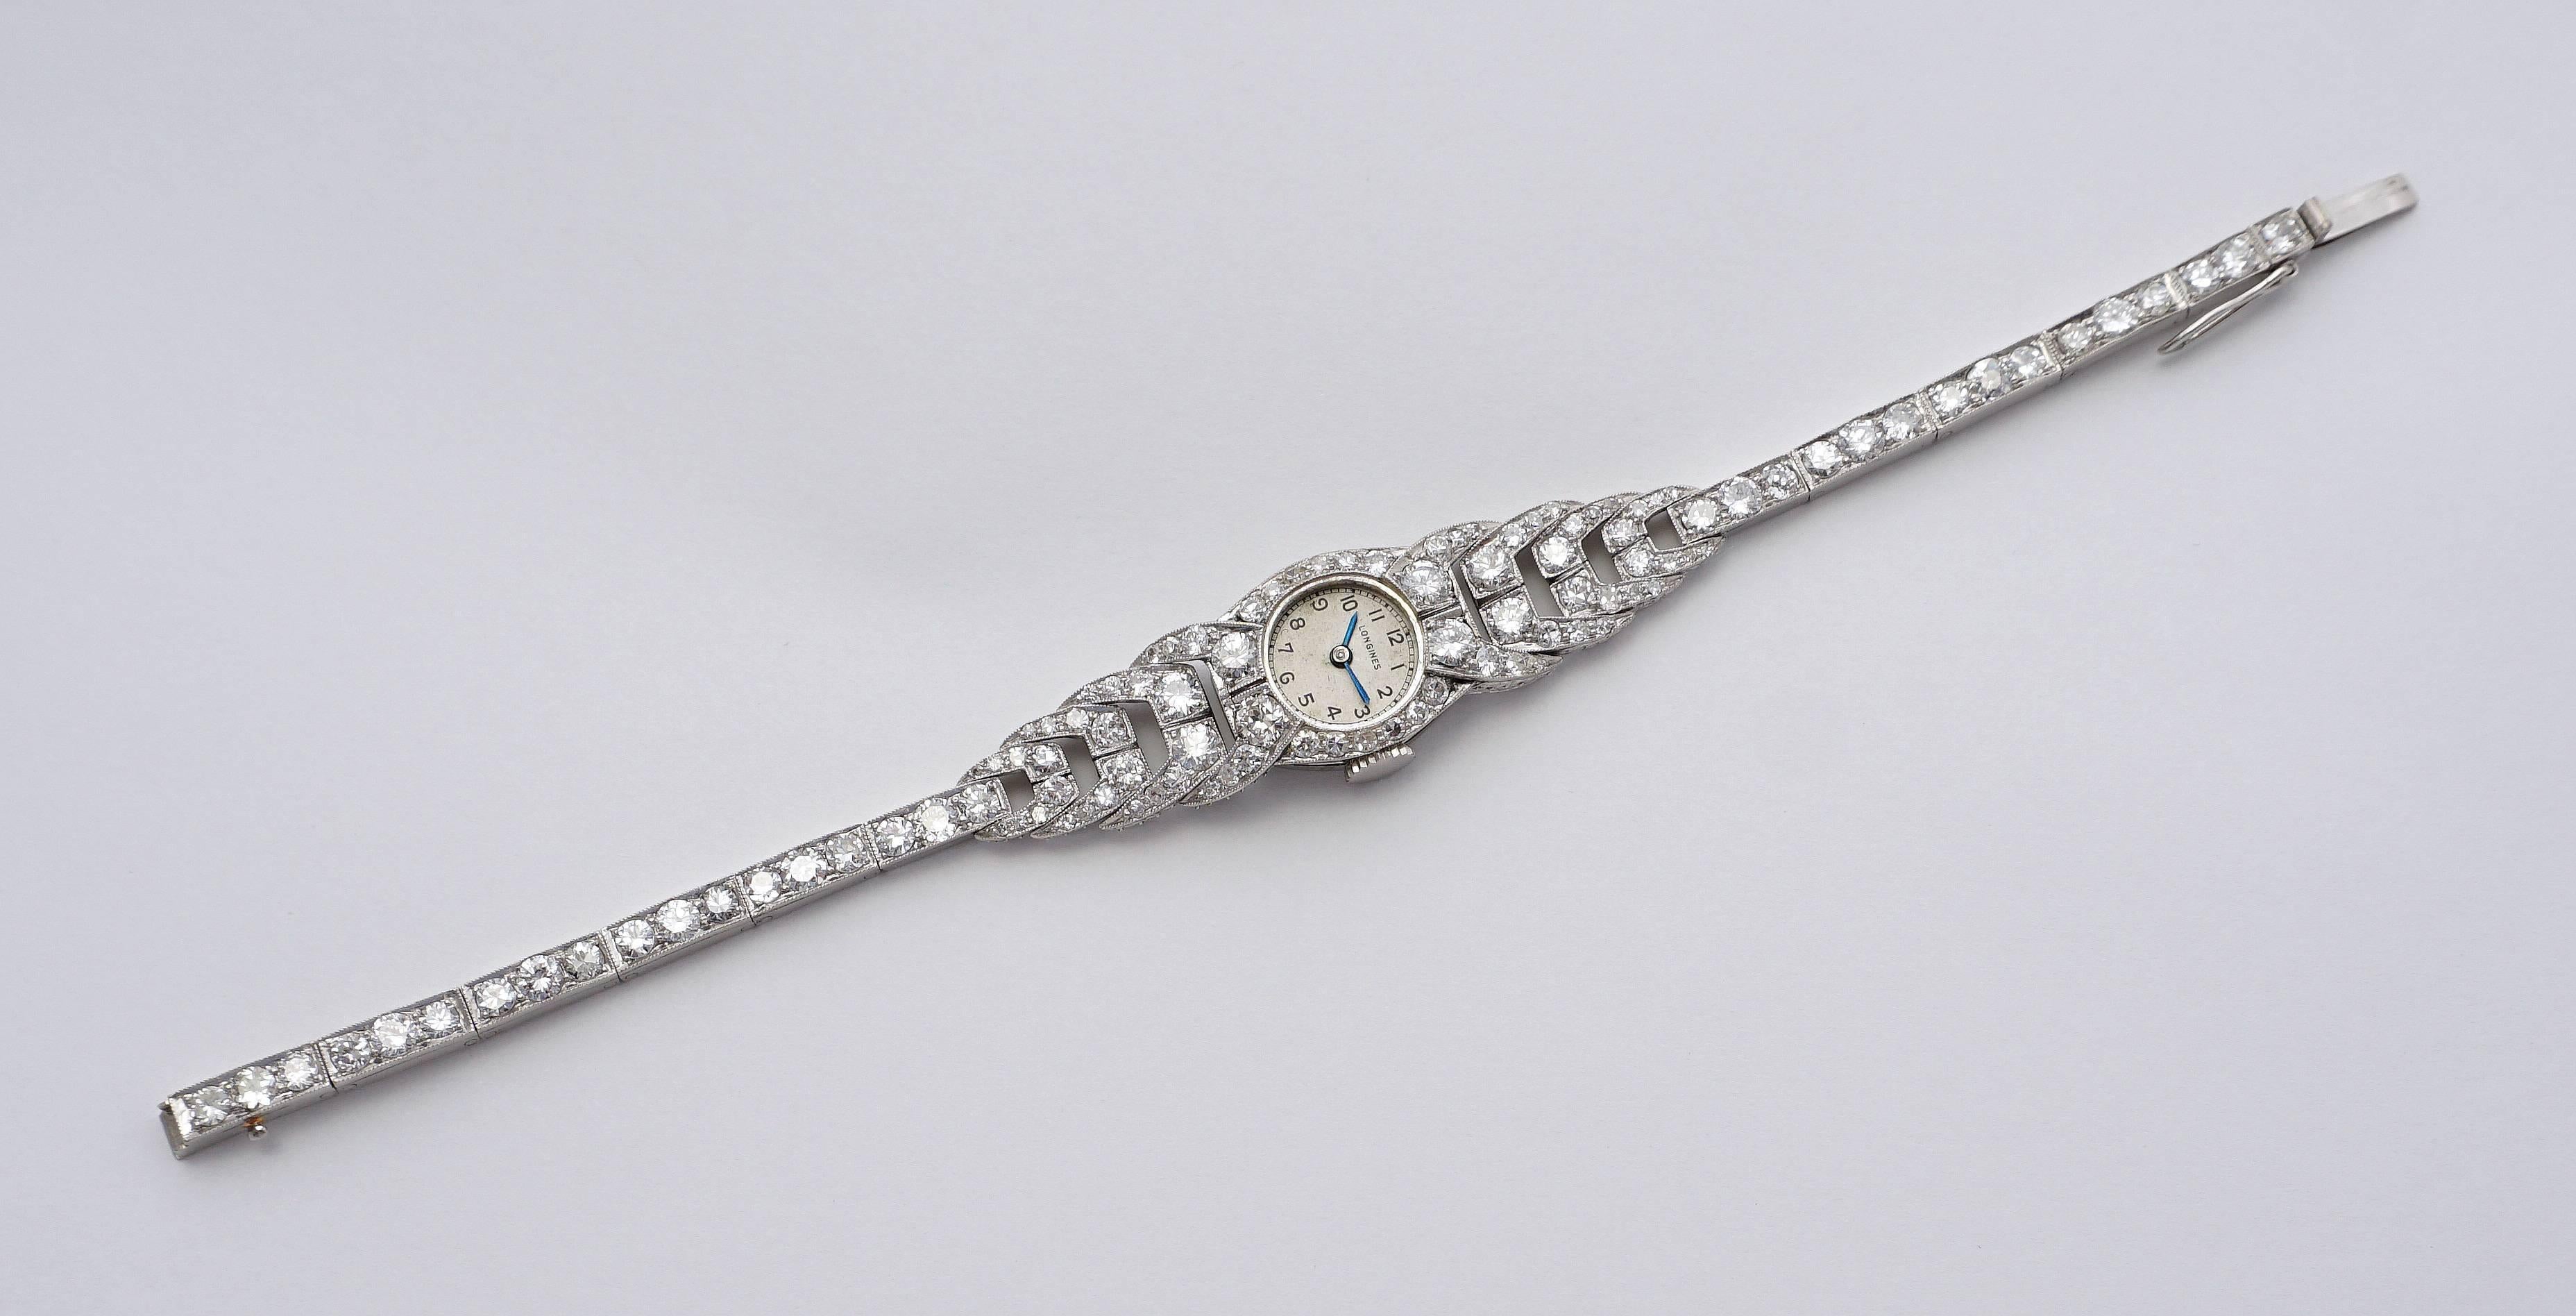 Beacon Hill Jewelers Presents:

A spectacular art deco period ladies diamond set Longines wrist watch in luxurious platinum.  Set with a total of 105 diamonds weighing a combined 7.54 carats, this watch features a truly spectacular art deco design